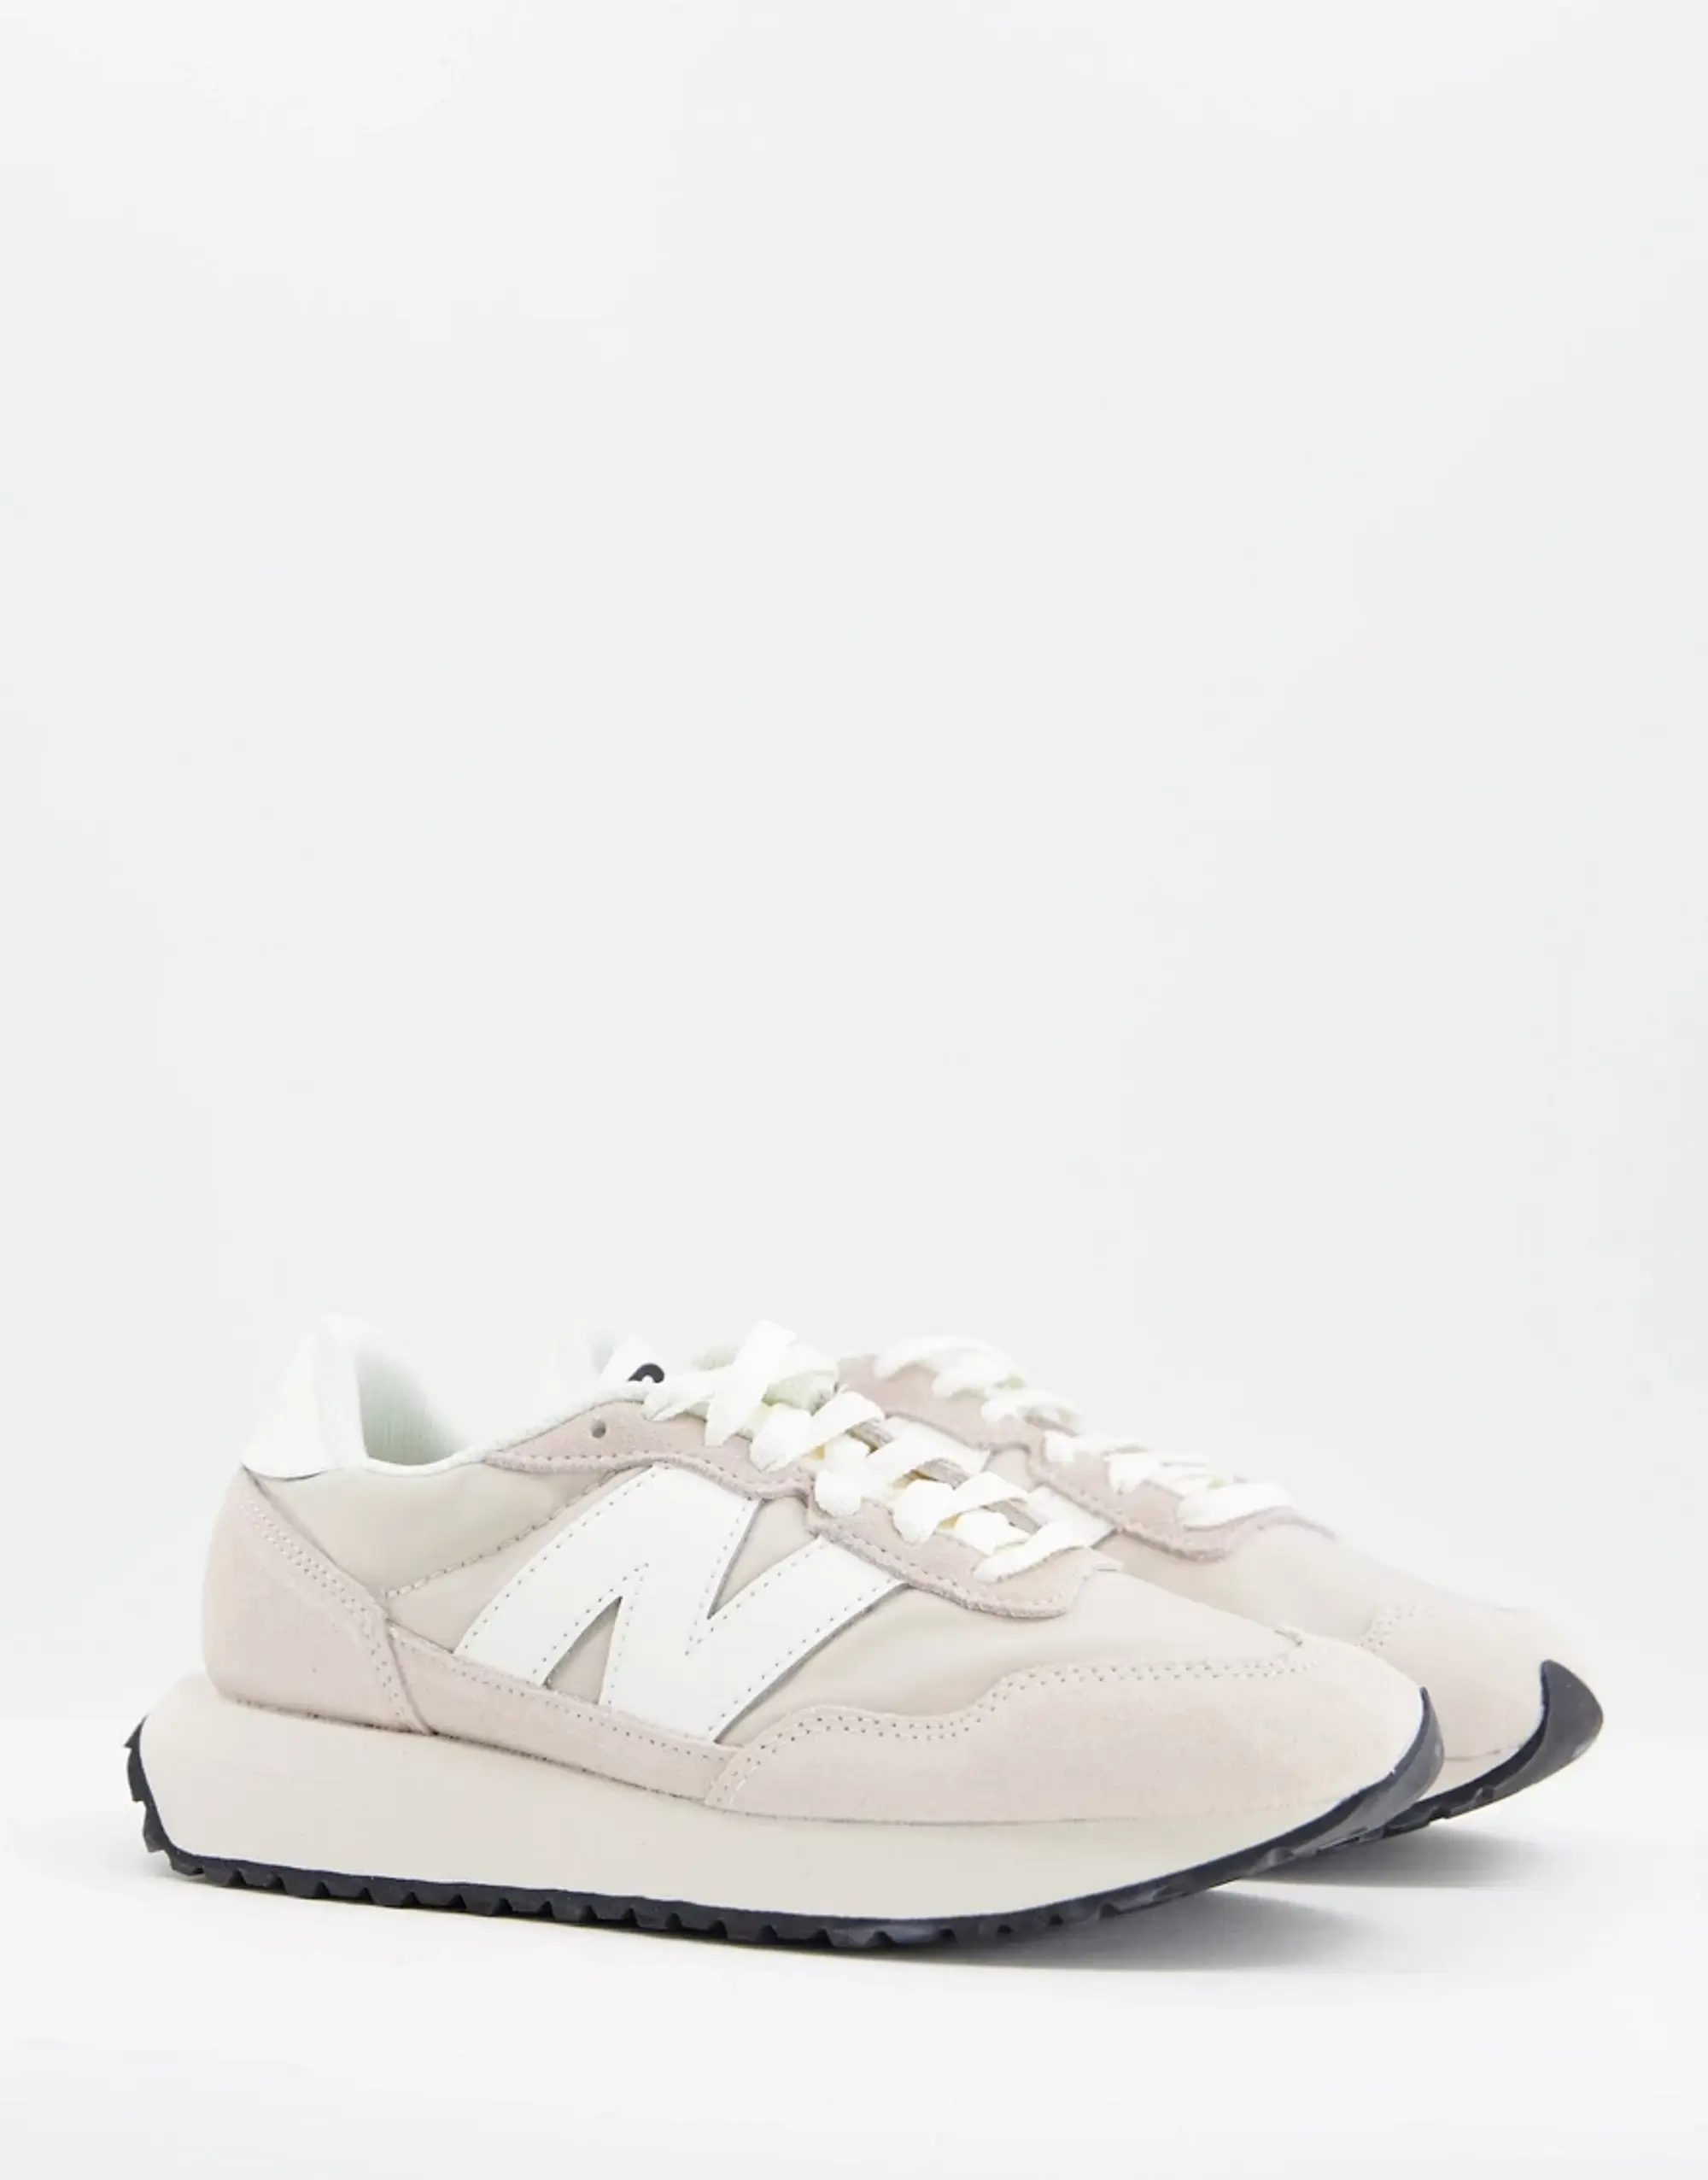 New Balance 237 - Women Shoes - Pink - Leather, Textile - Size 4 - Foot Locker